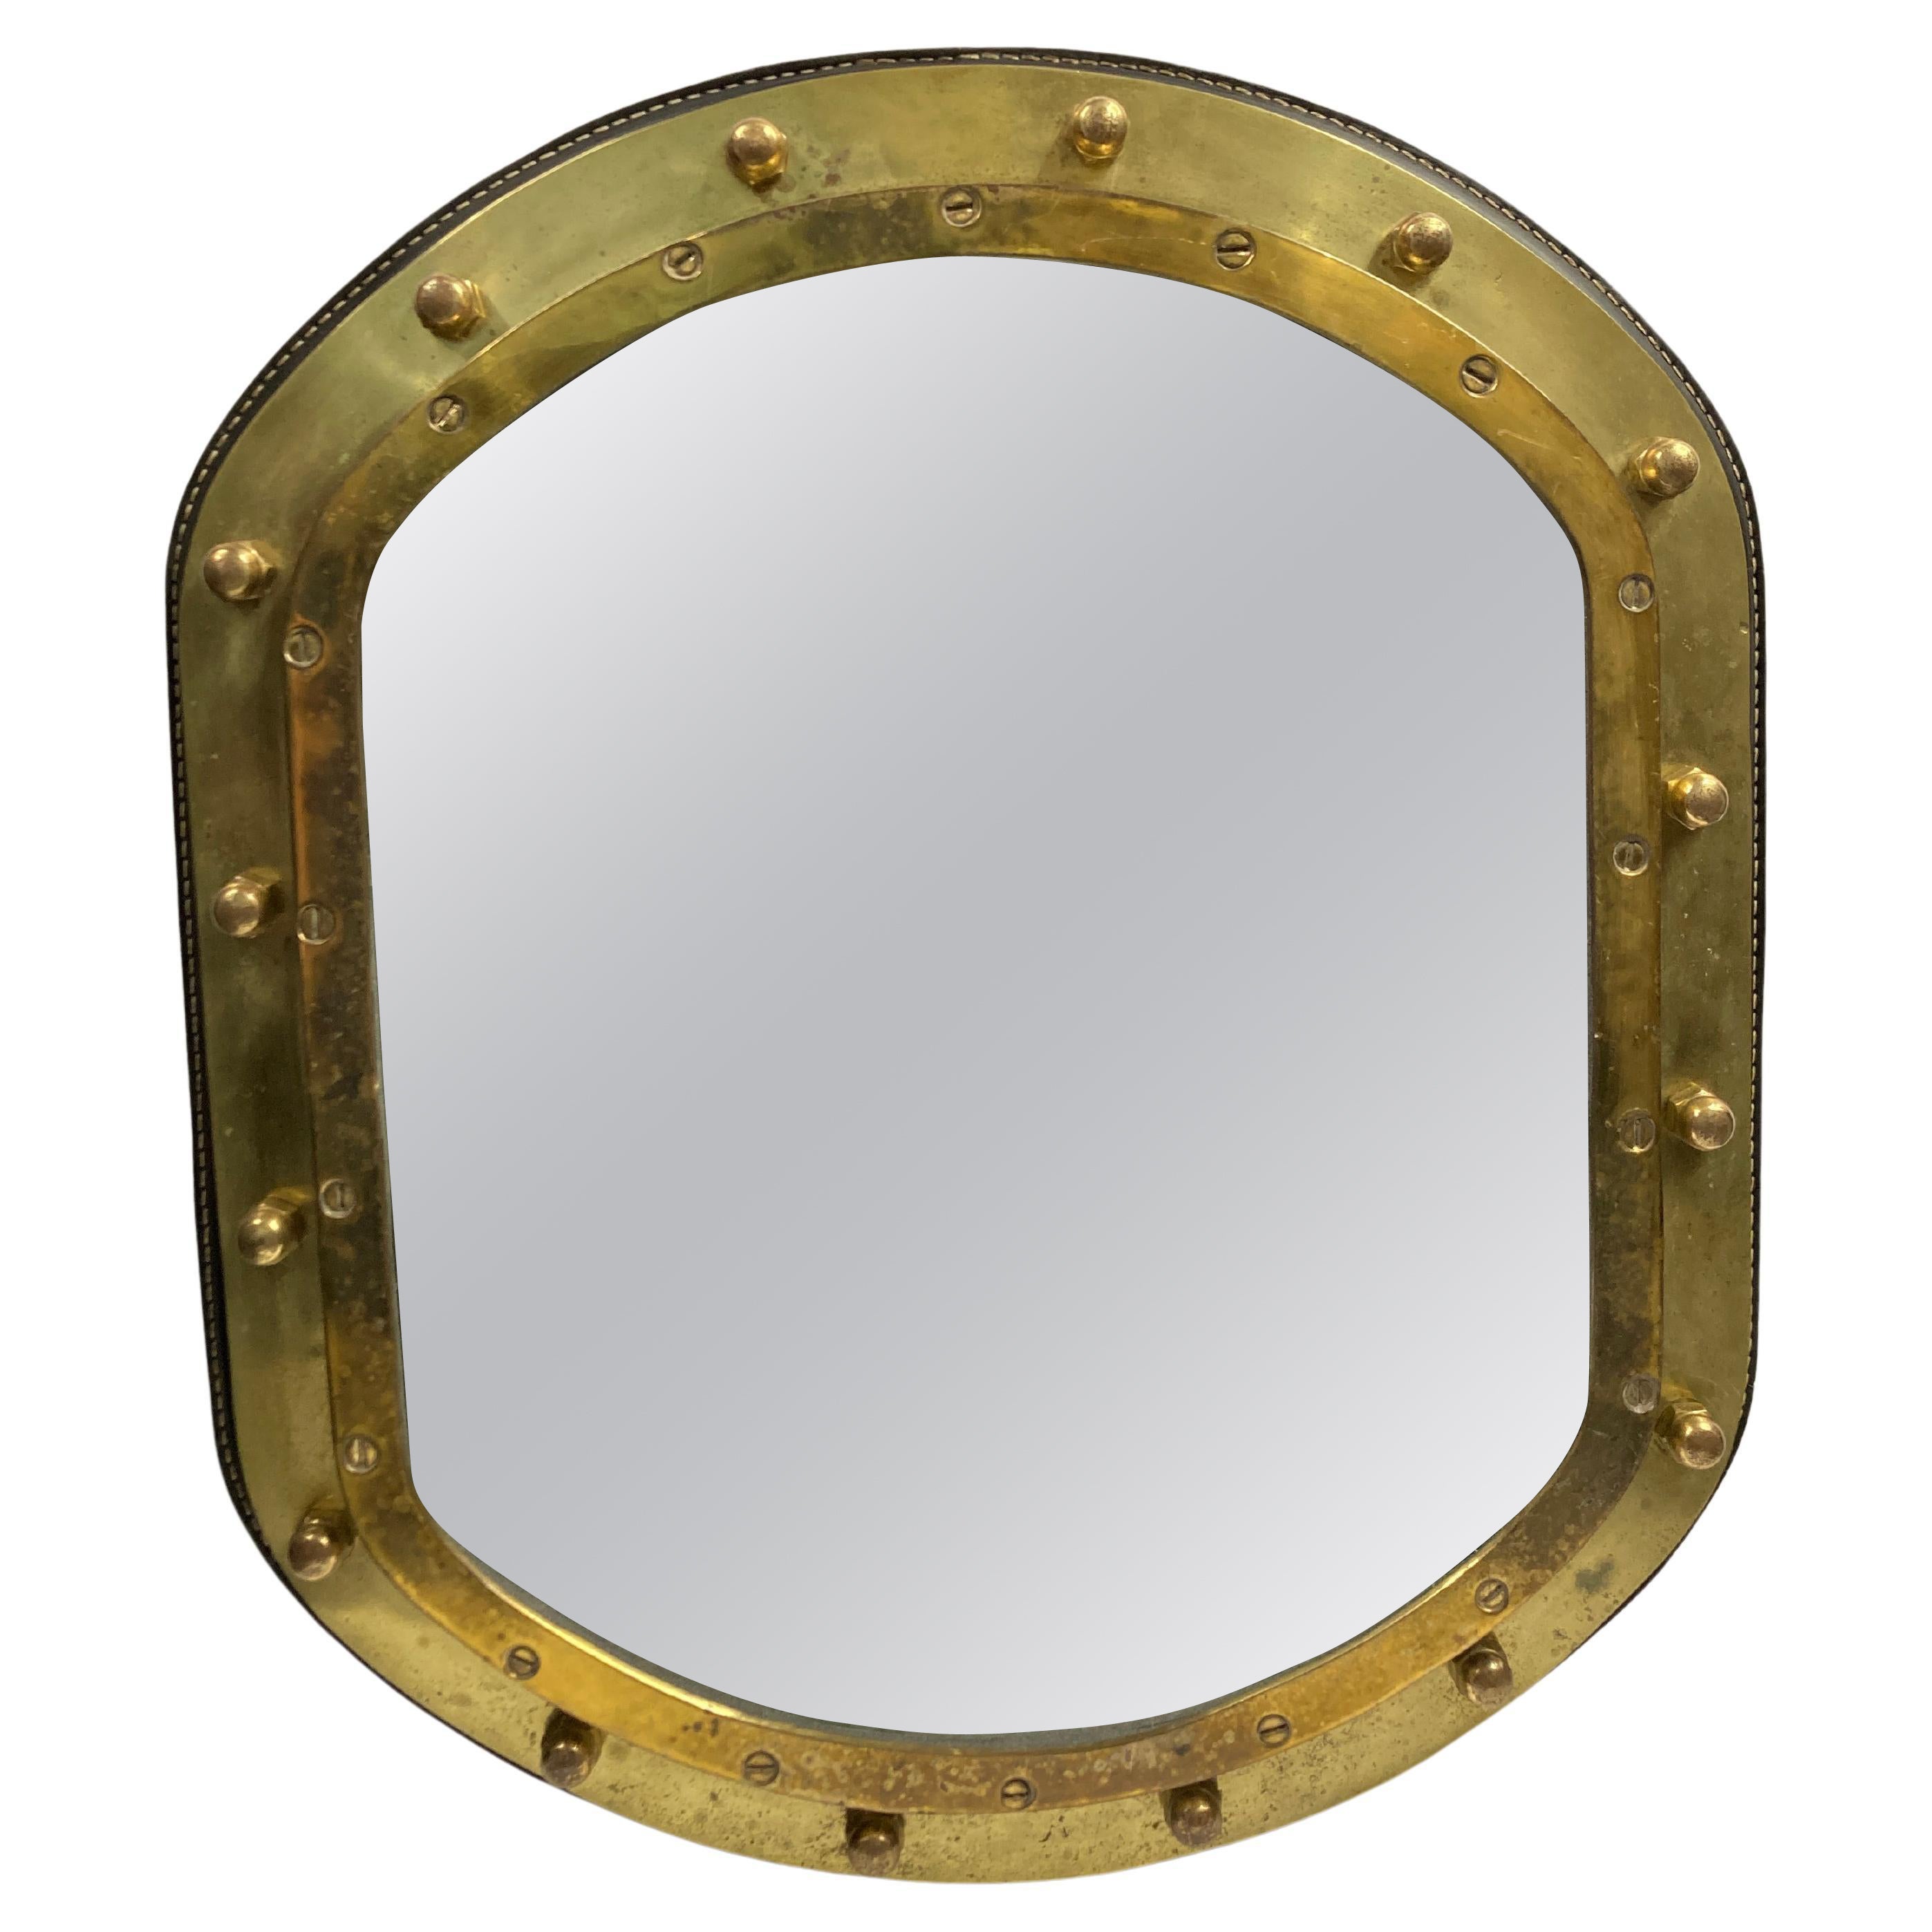 1950's Stitched leather and bronze wall Mirror by Jacques Adnet